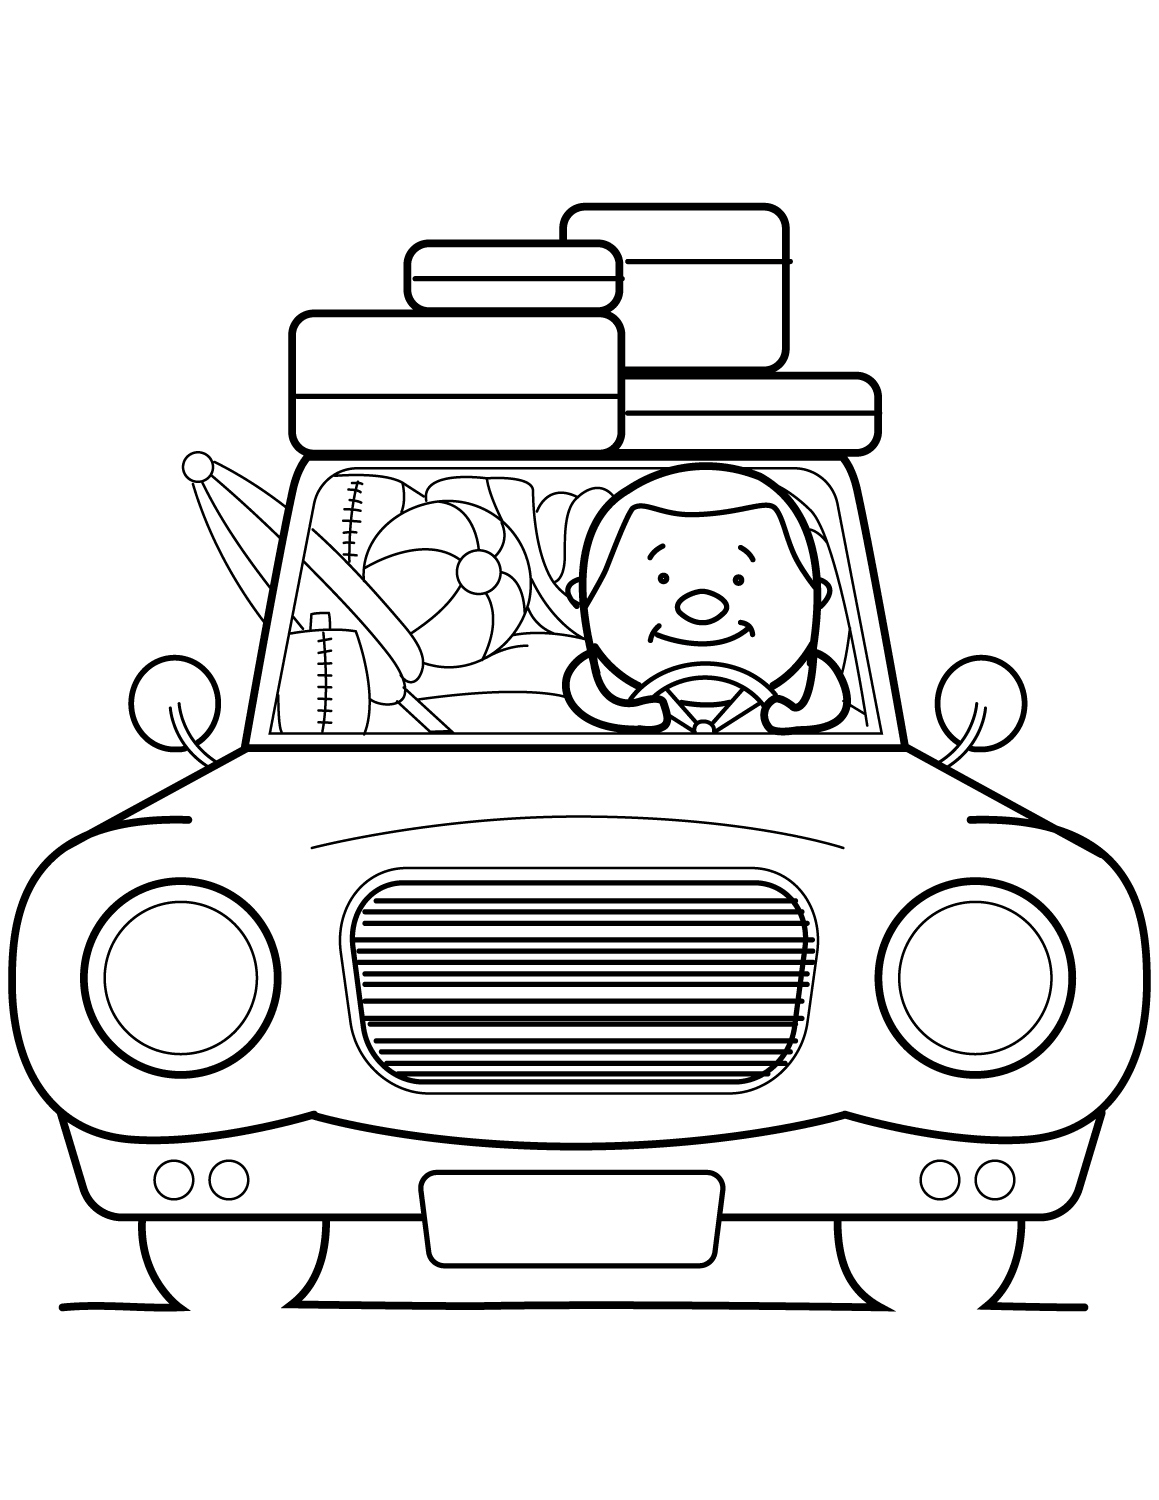 Go Summer Vacation Coloring Page